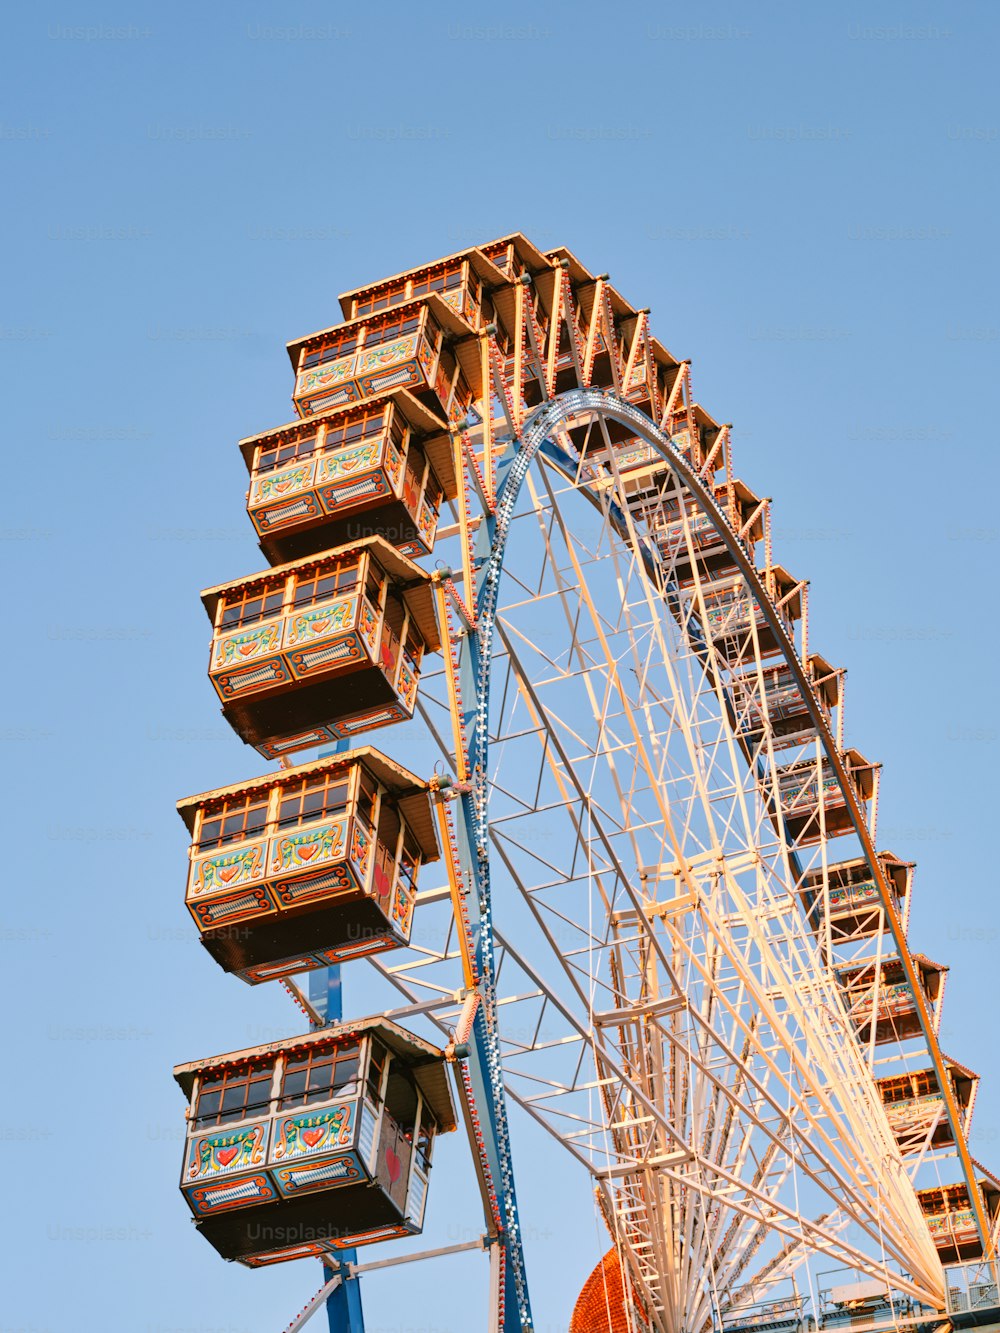 a large ferris wheel with multiple wooden boxes on it